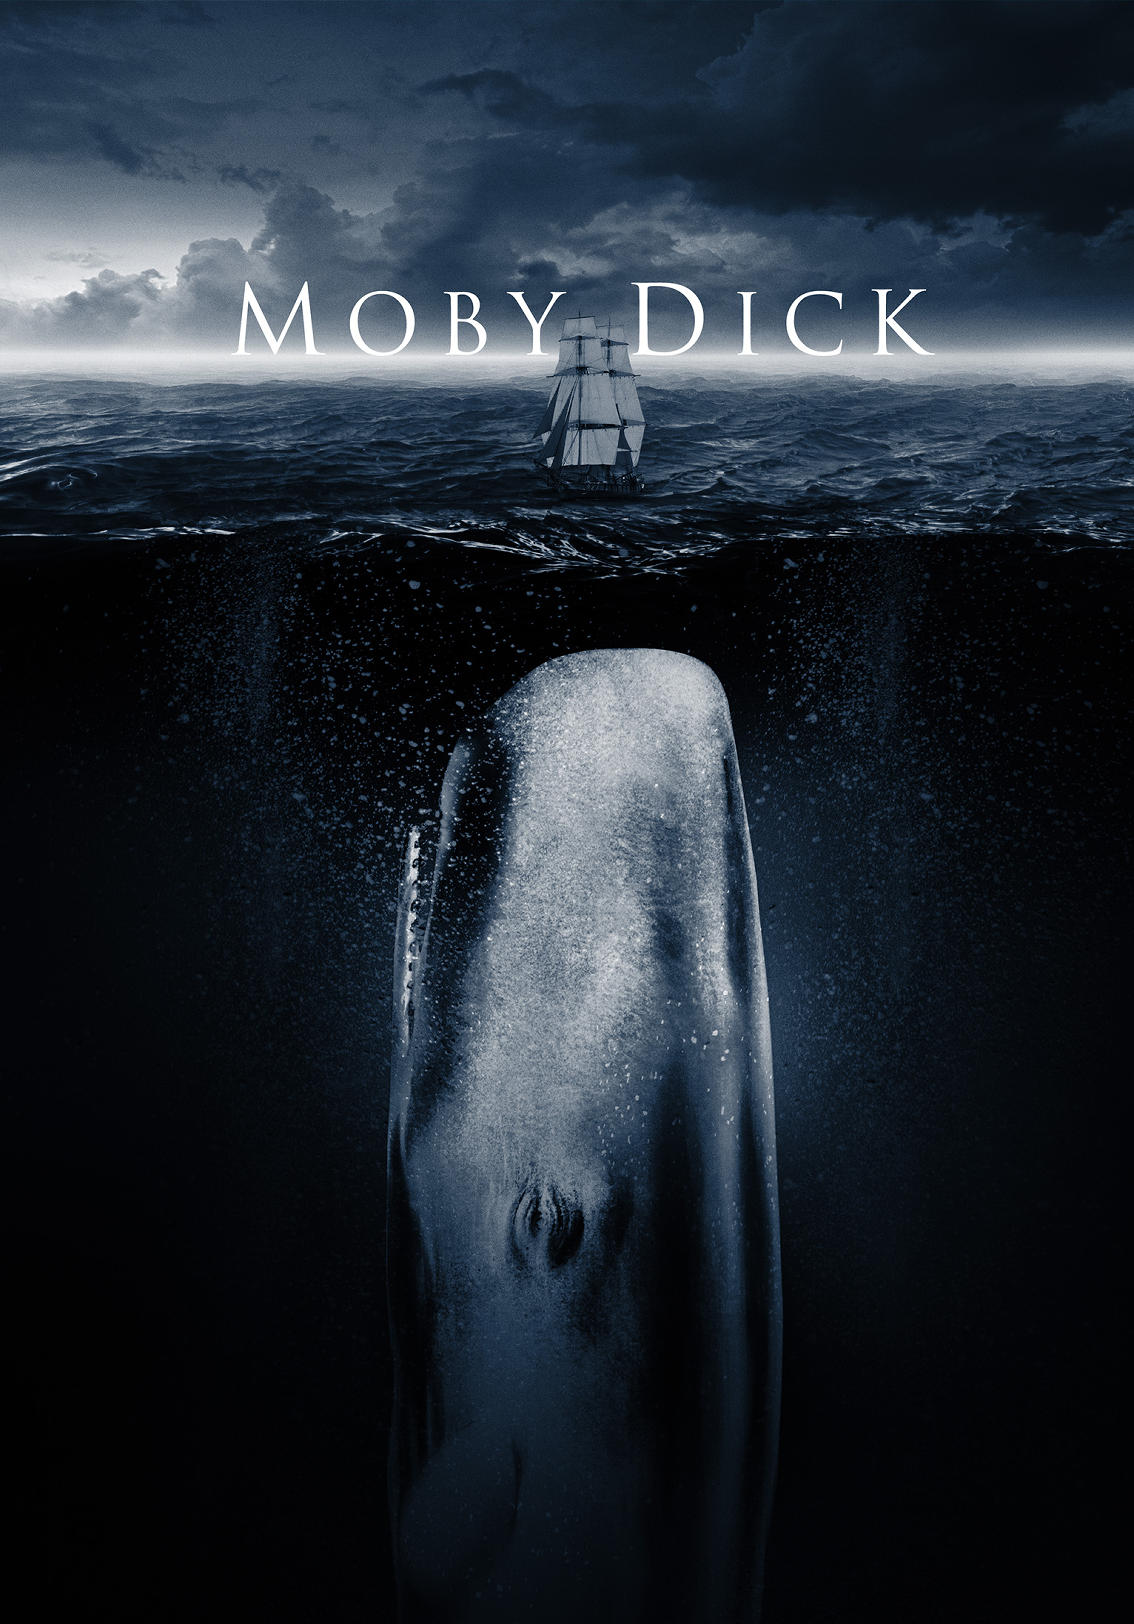 Moby dick gilian anderson